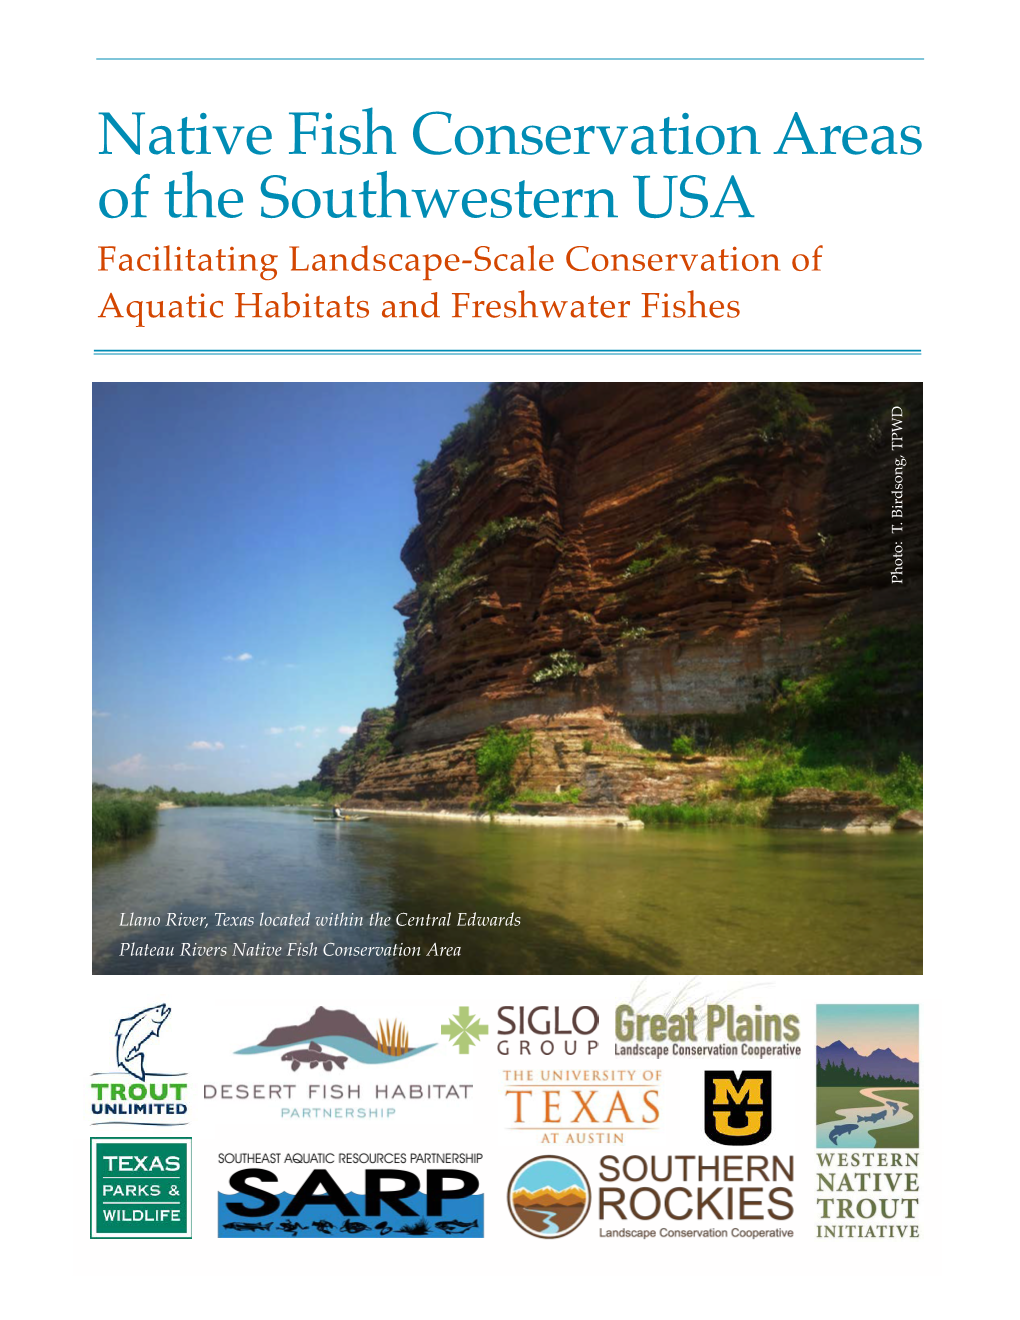 Native Fish Conservation Areas of the Southwestern USA Facilitating Landscape-Scale Conservation of Aquatic Habitats and Freshwater Fishes Photo: T